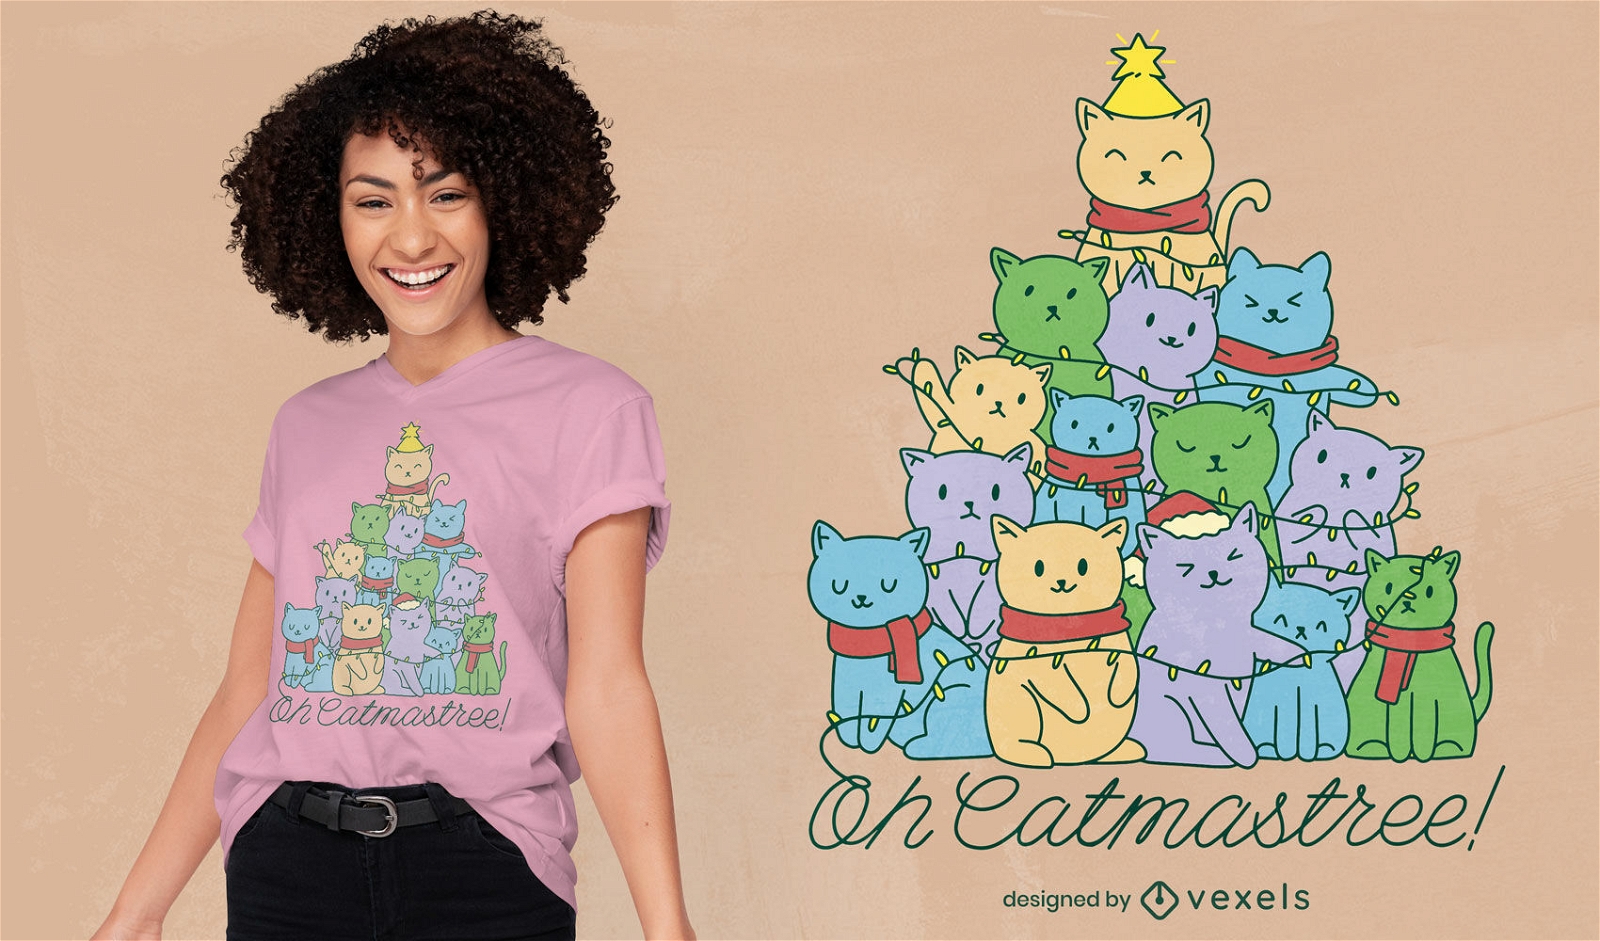 Oh catmastree Weihnachts-T-Shirt-Design